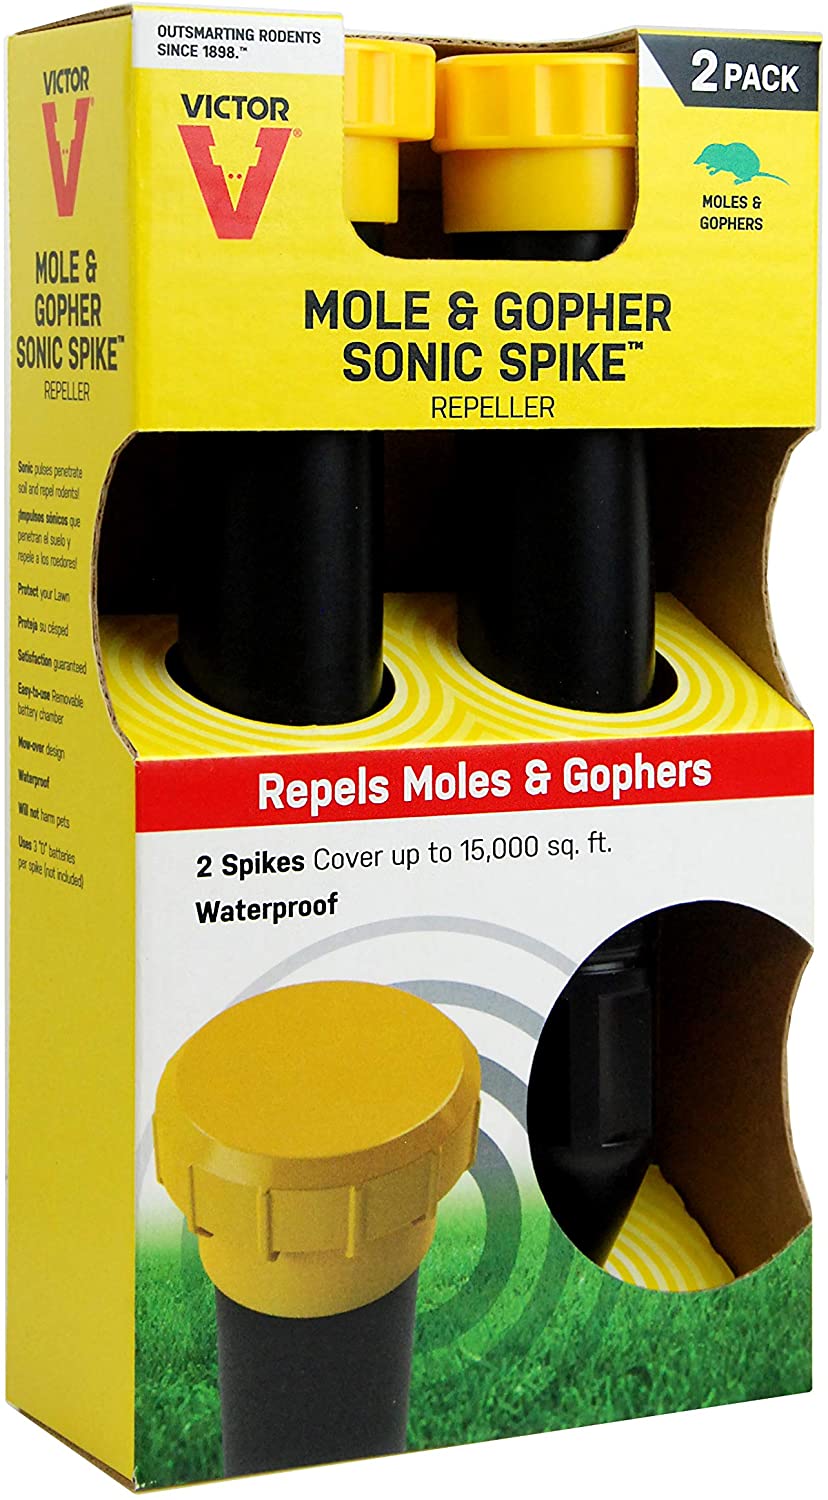 Victor's Mole and Gopher Twin Pack Sonic Spikes